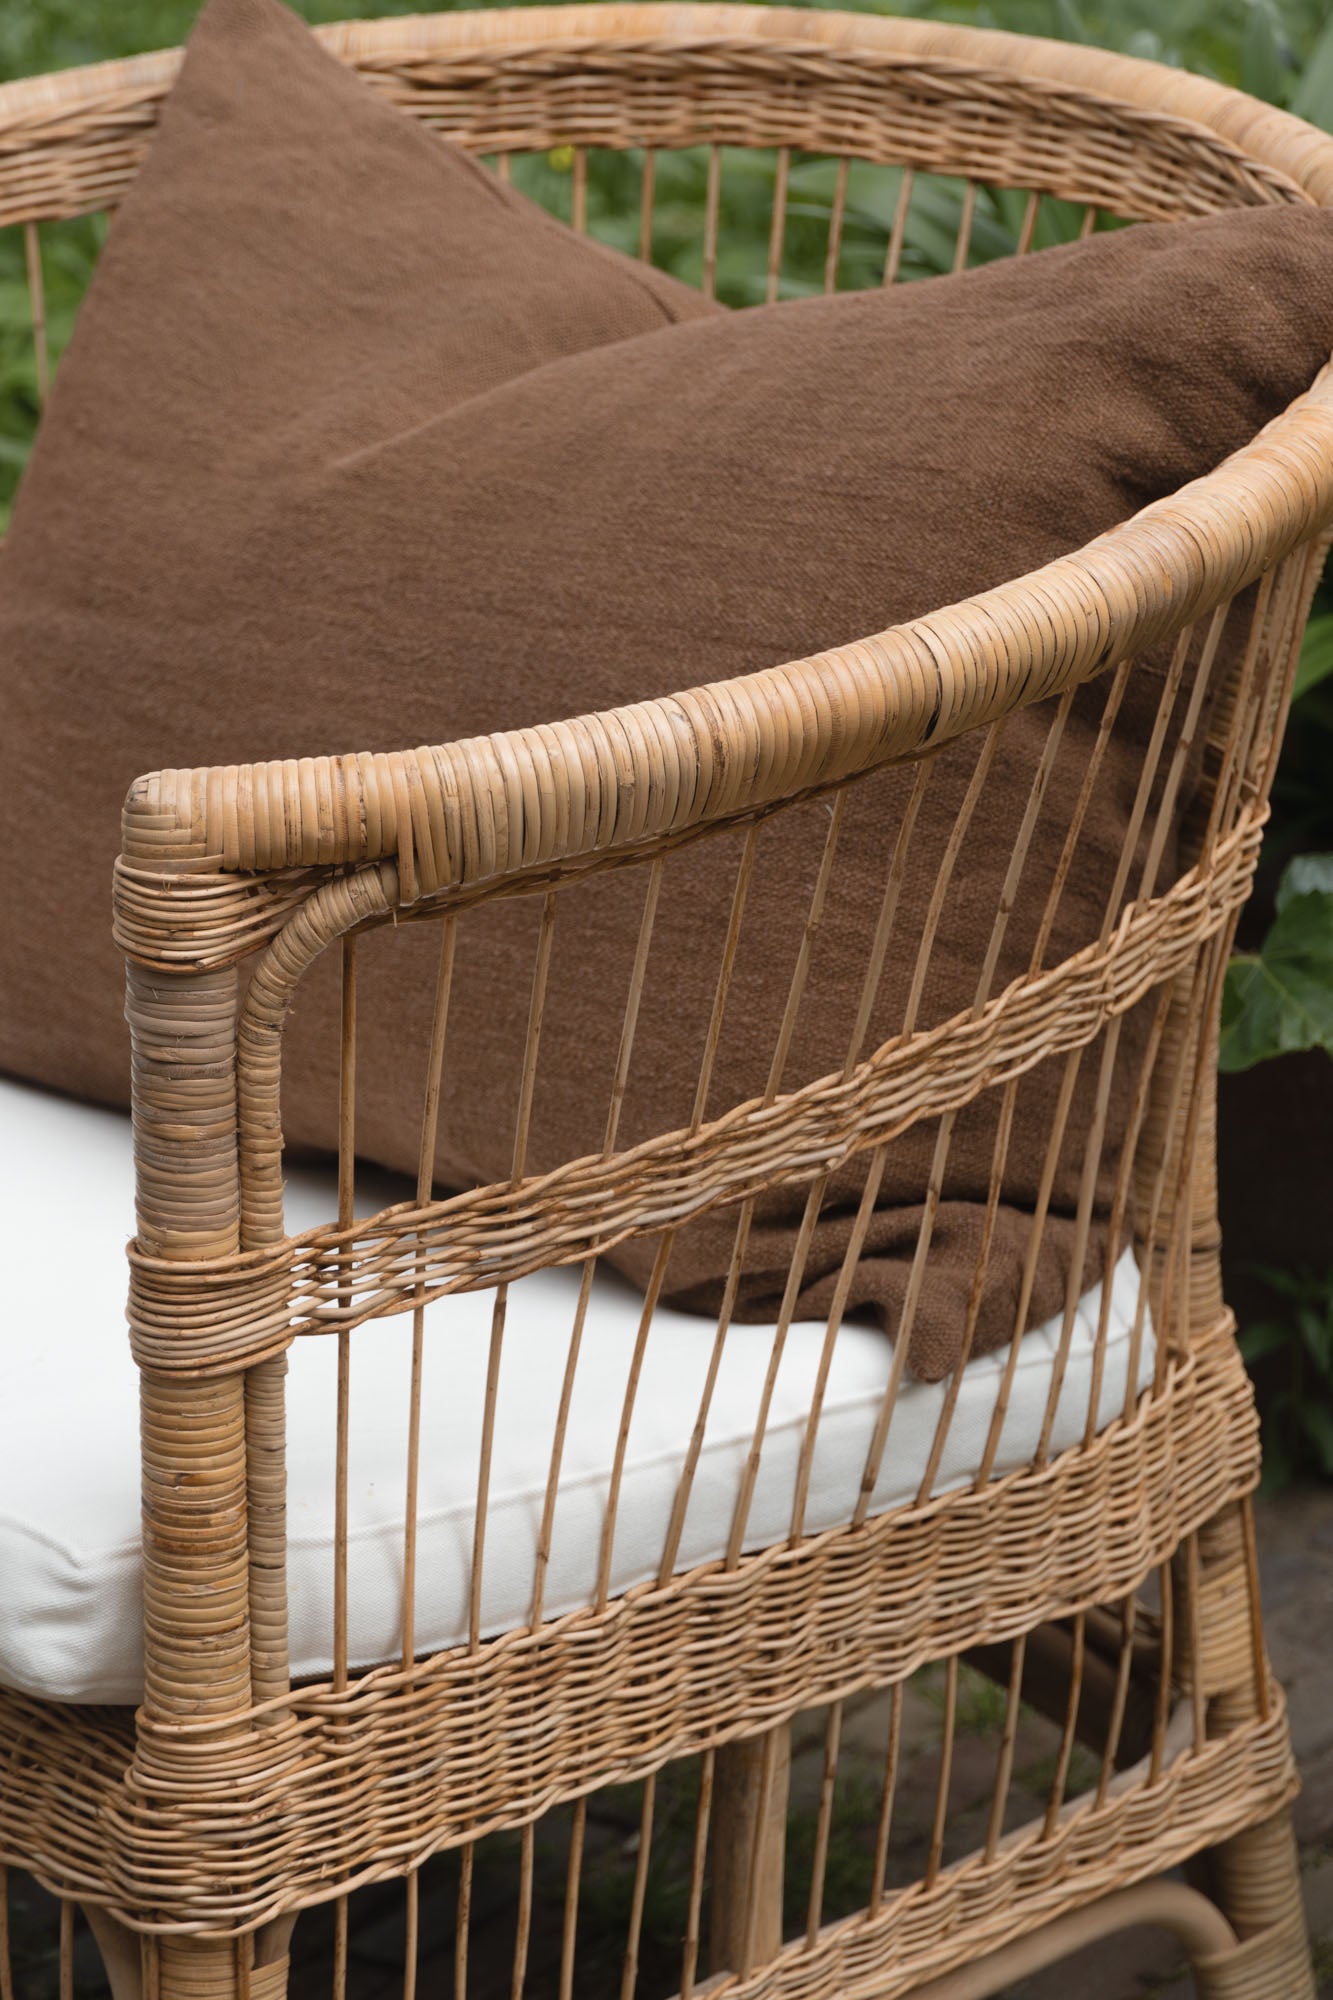 Close-up of the Rattan Chair by Tine K Home.